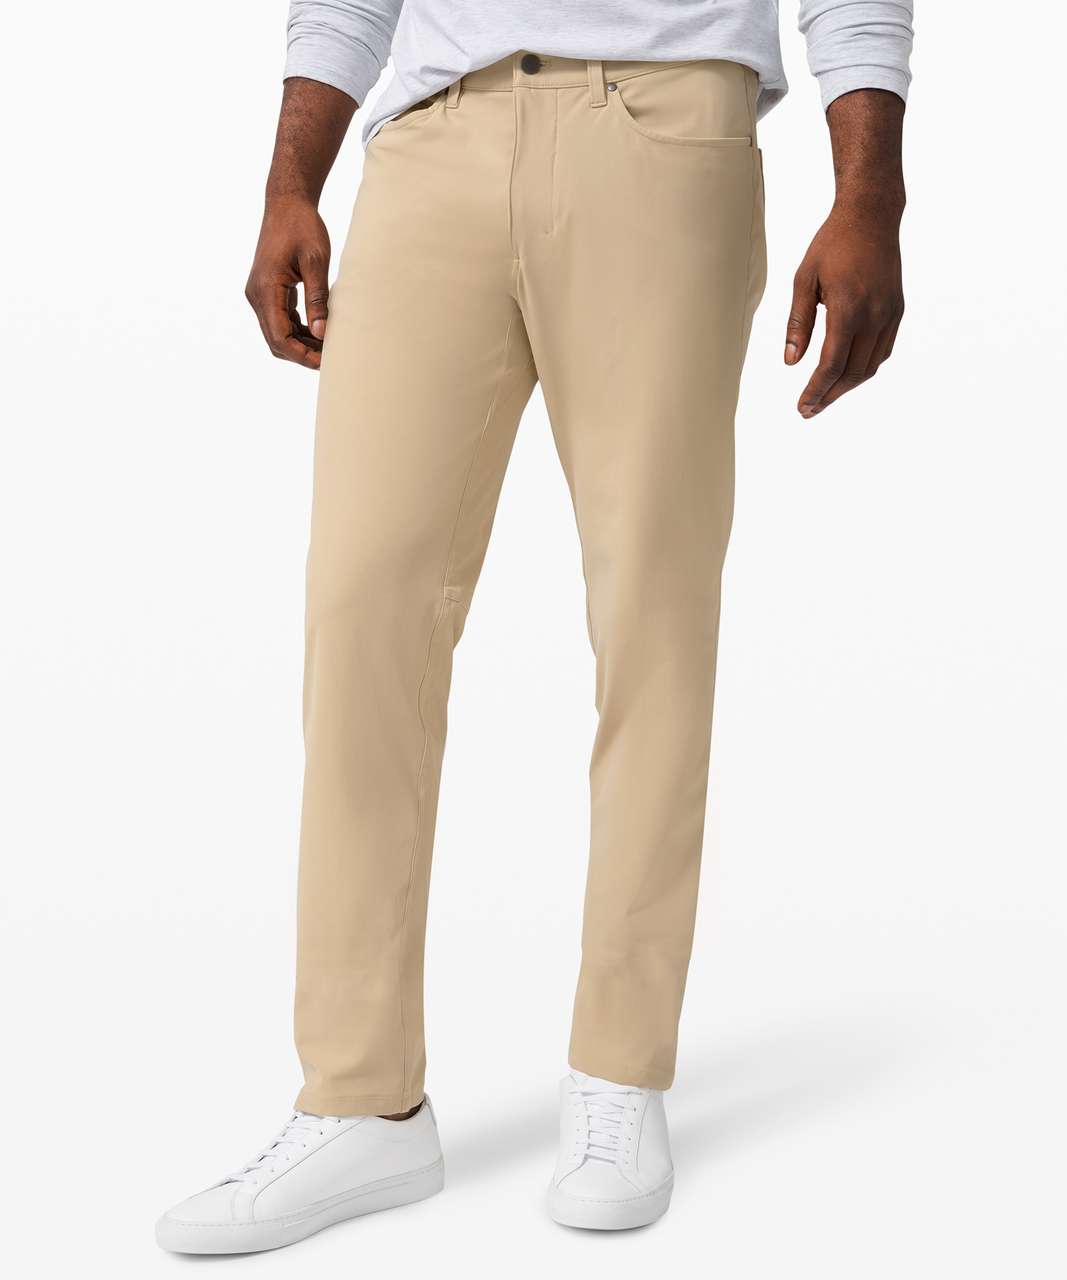 ReStock Alert: Lululemon Classic Fit Commission and ABC pants in 30″ Inseam